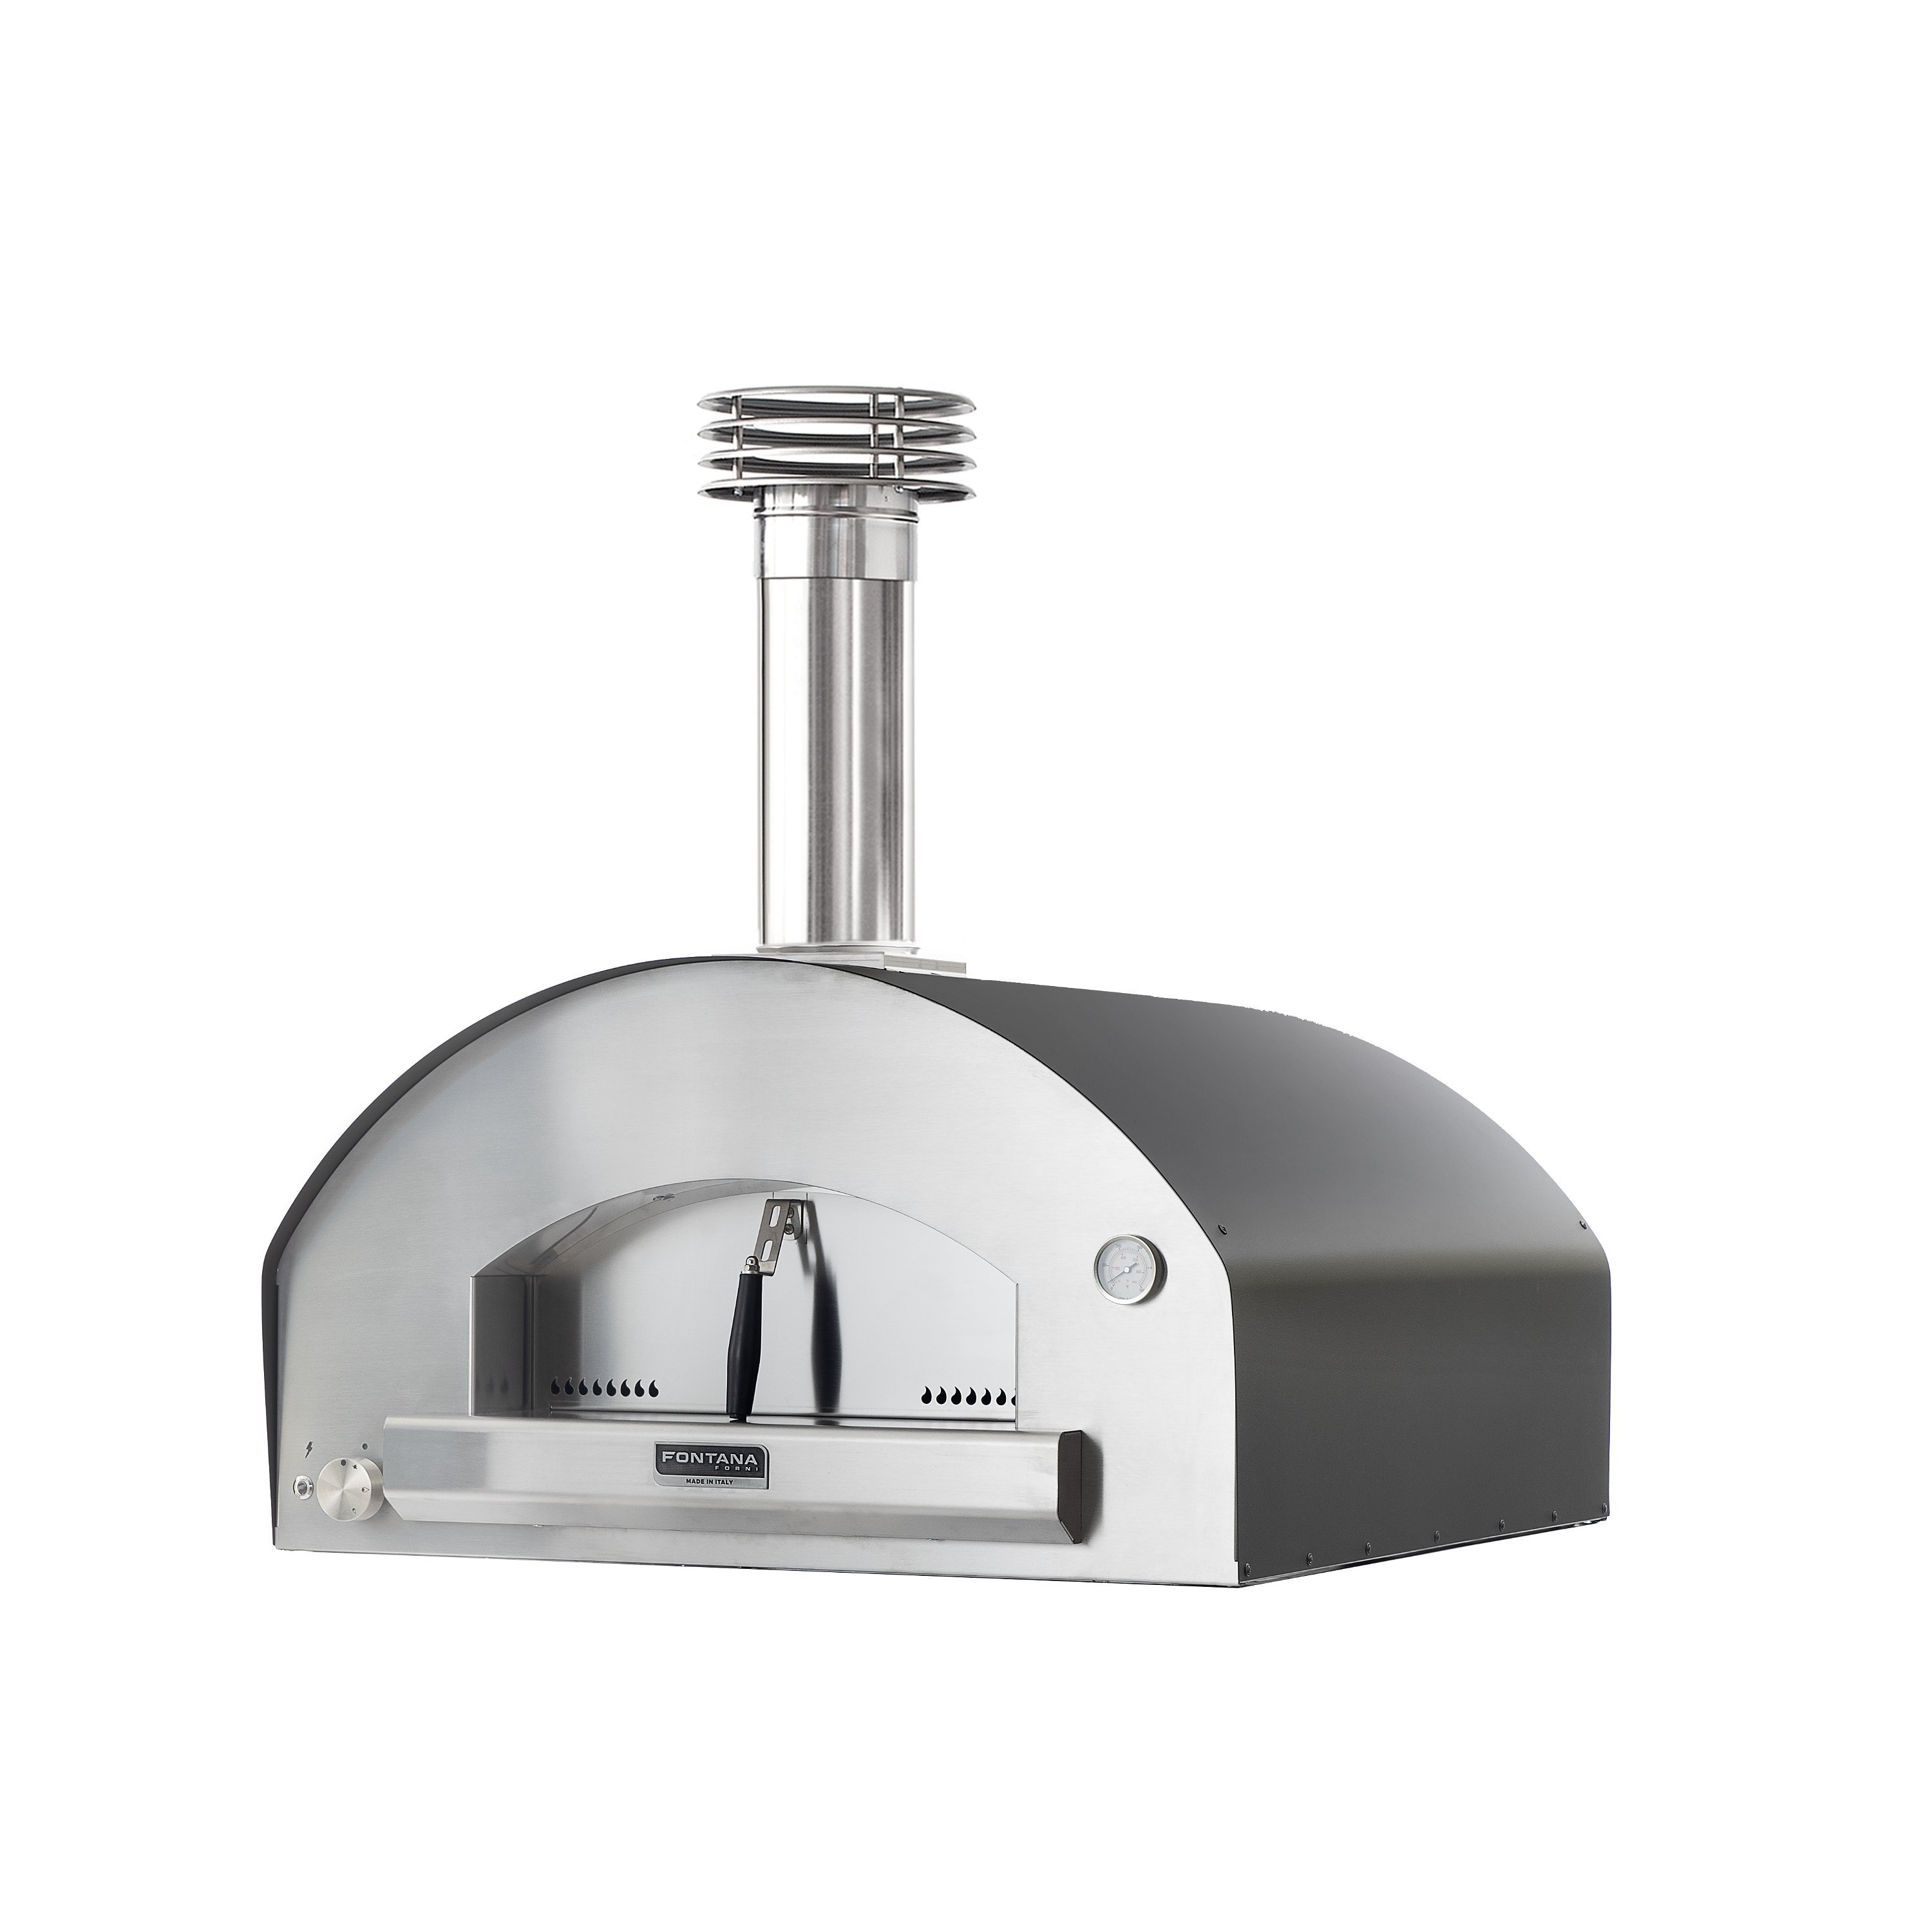 Dome oven Fontana Marinara, stainless steel pizza oven with gas firing